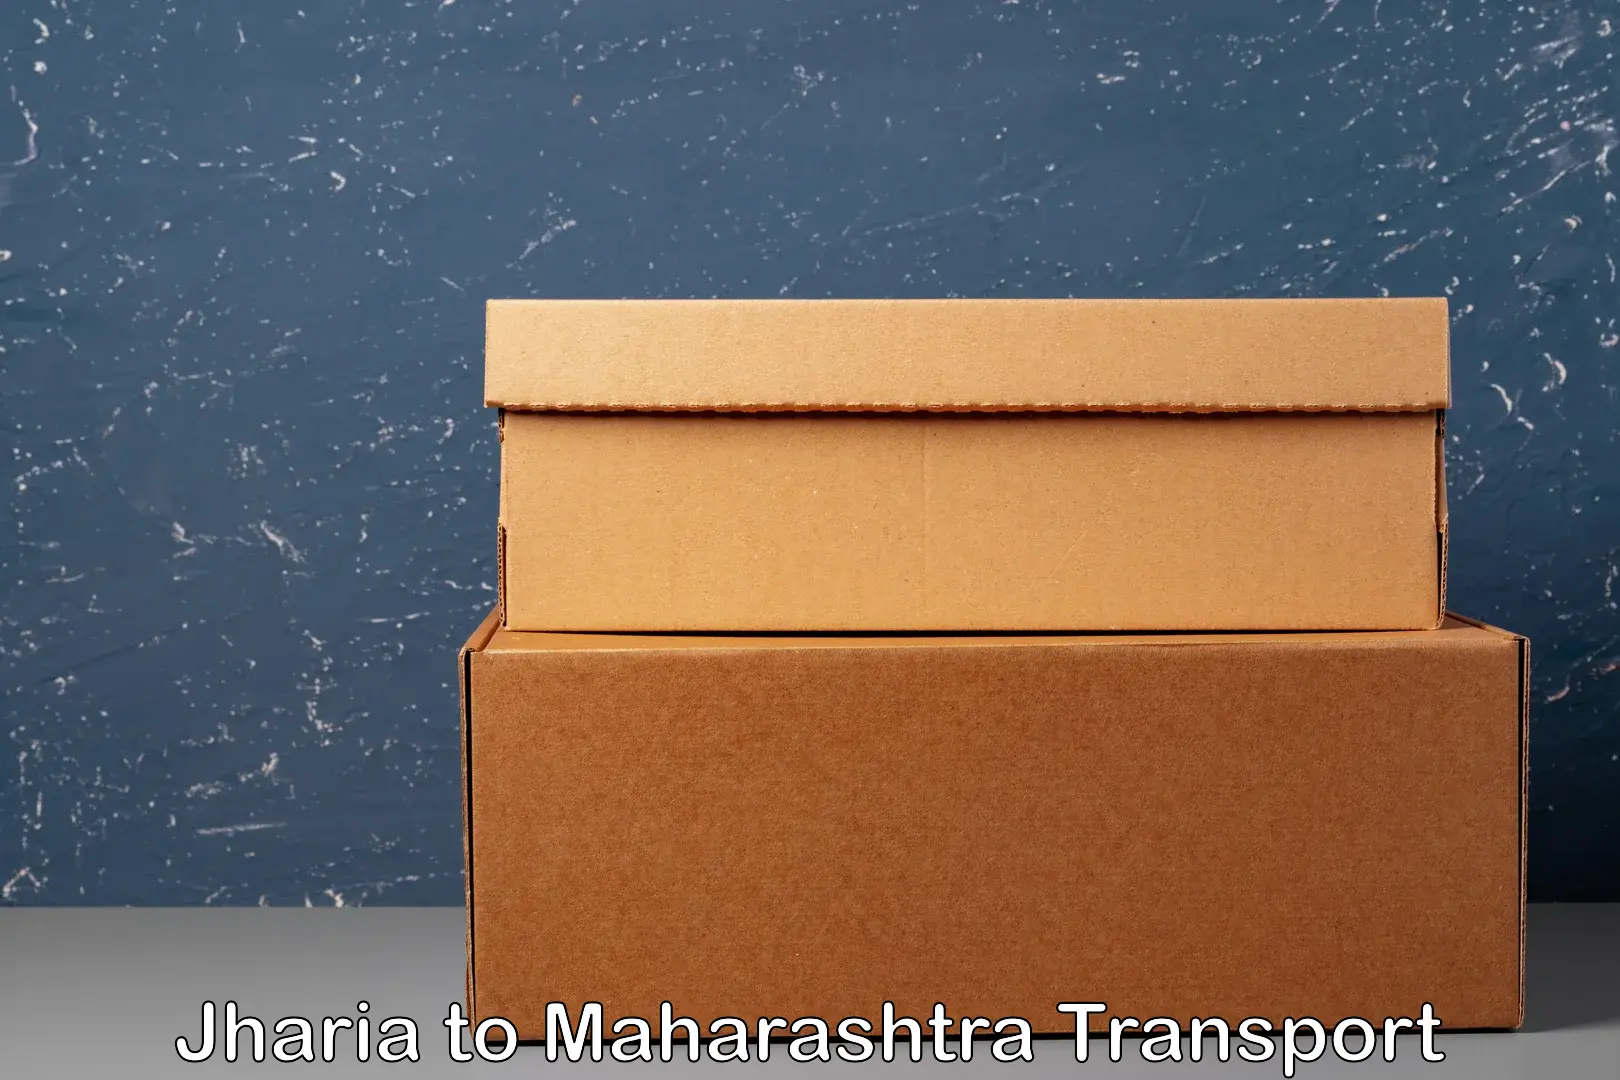 Nationwide transport services Jharia to DY Patil Vidyapeeth Pune